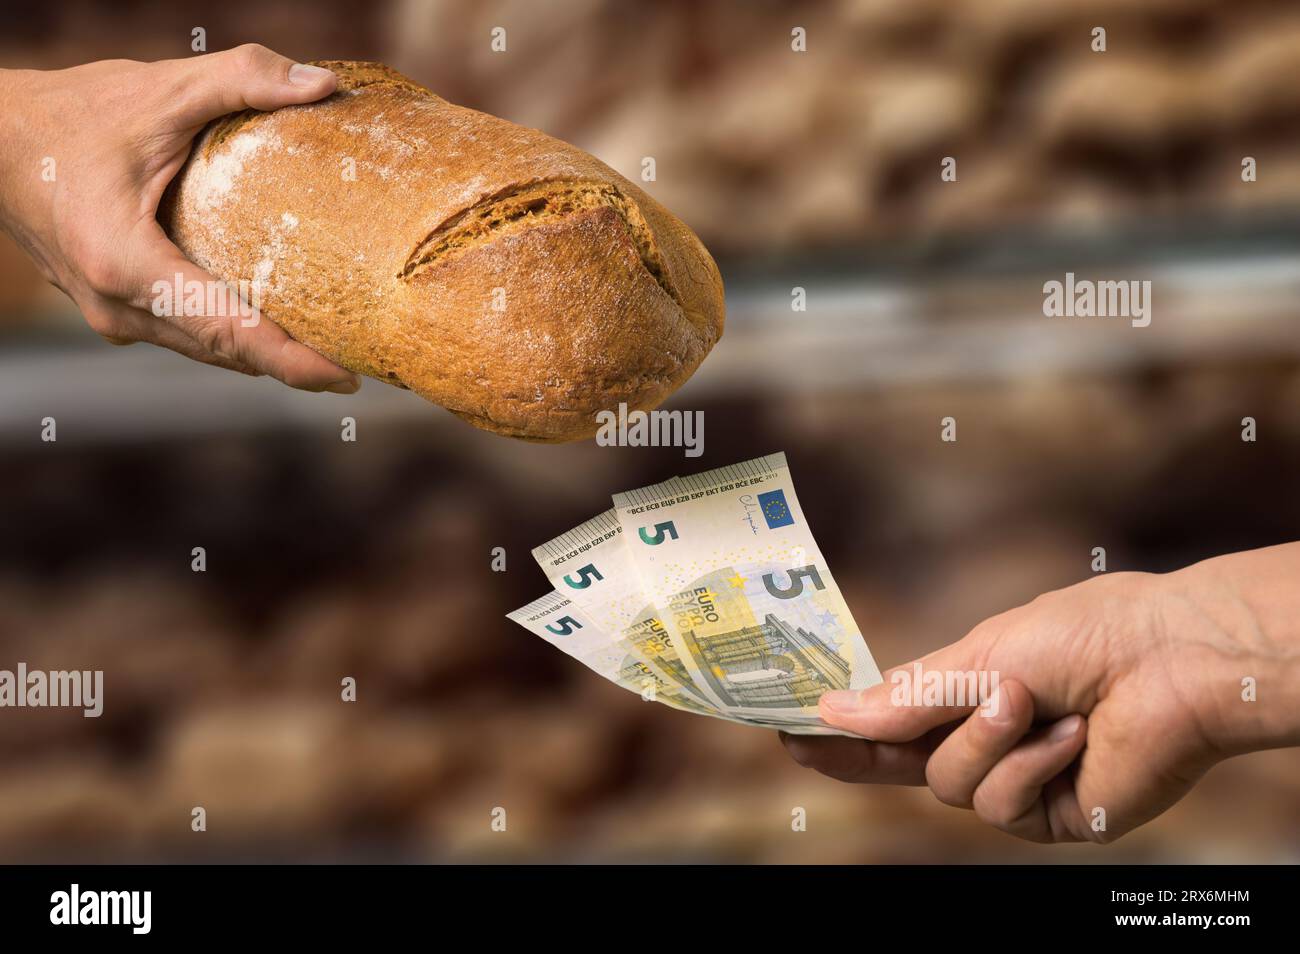 Inflation concept: paying 15 euros for one loaf of bread. Closeup of the hands of the buyer and the seller in front of the bread counter Stock Photo